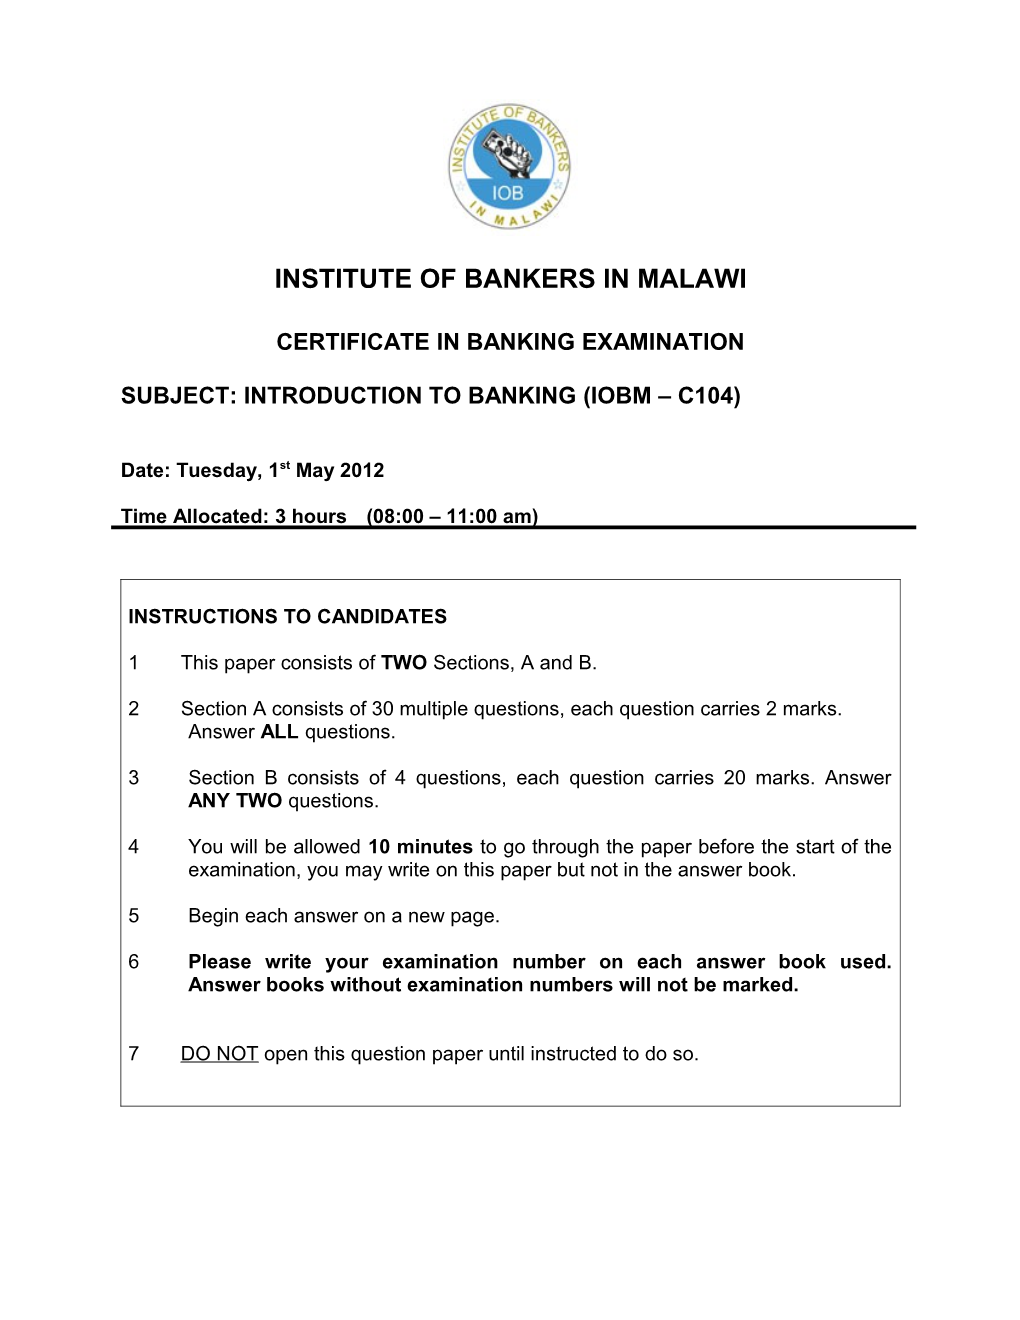 Subject: Introduction to Banking (Iobm C104)